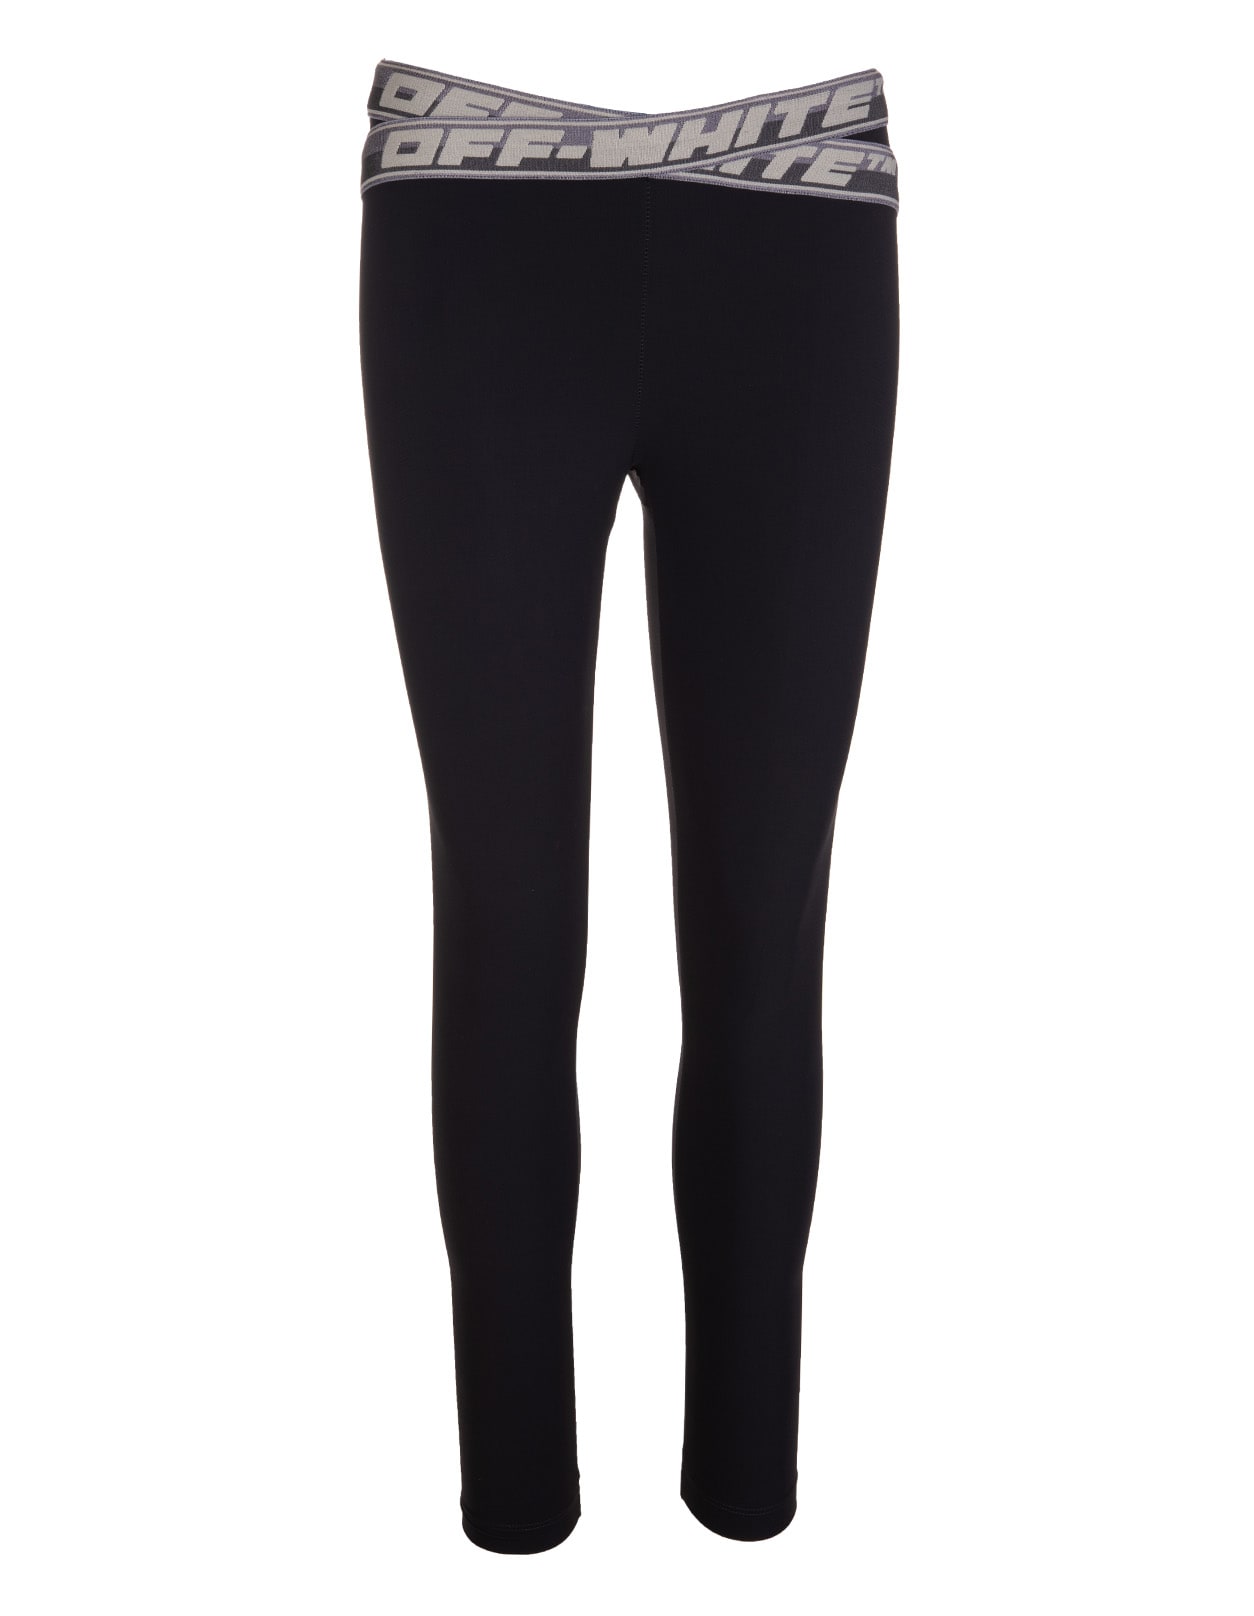 Off-White Black Sports Leggings With Logoed Elastic Bands